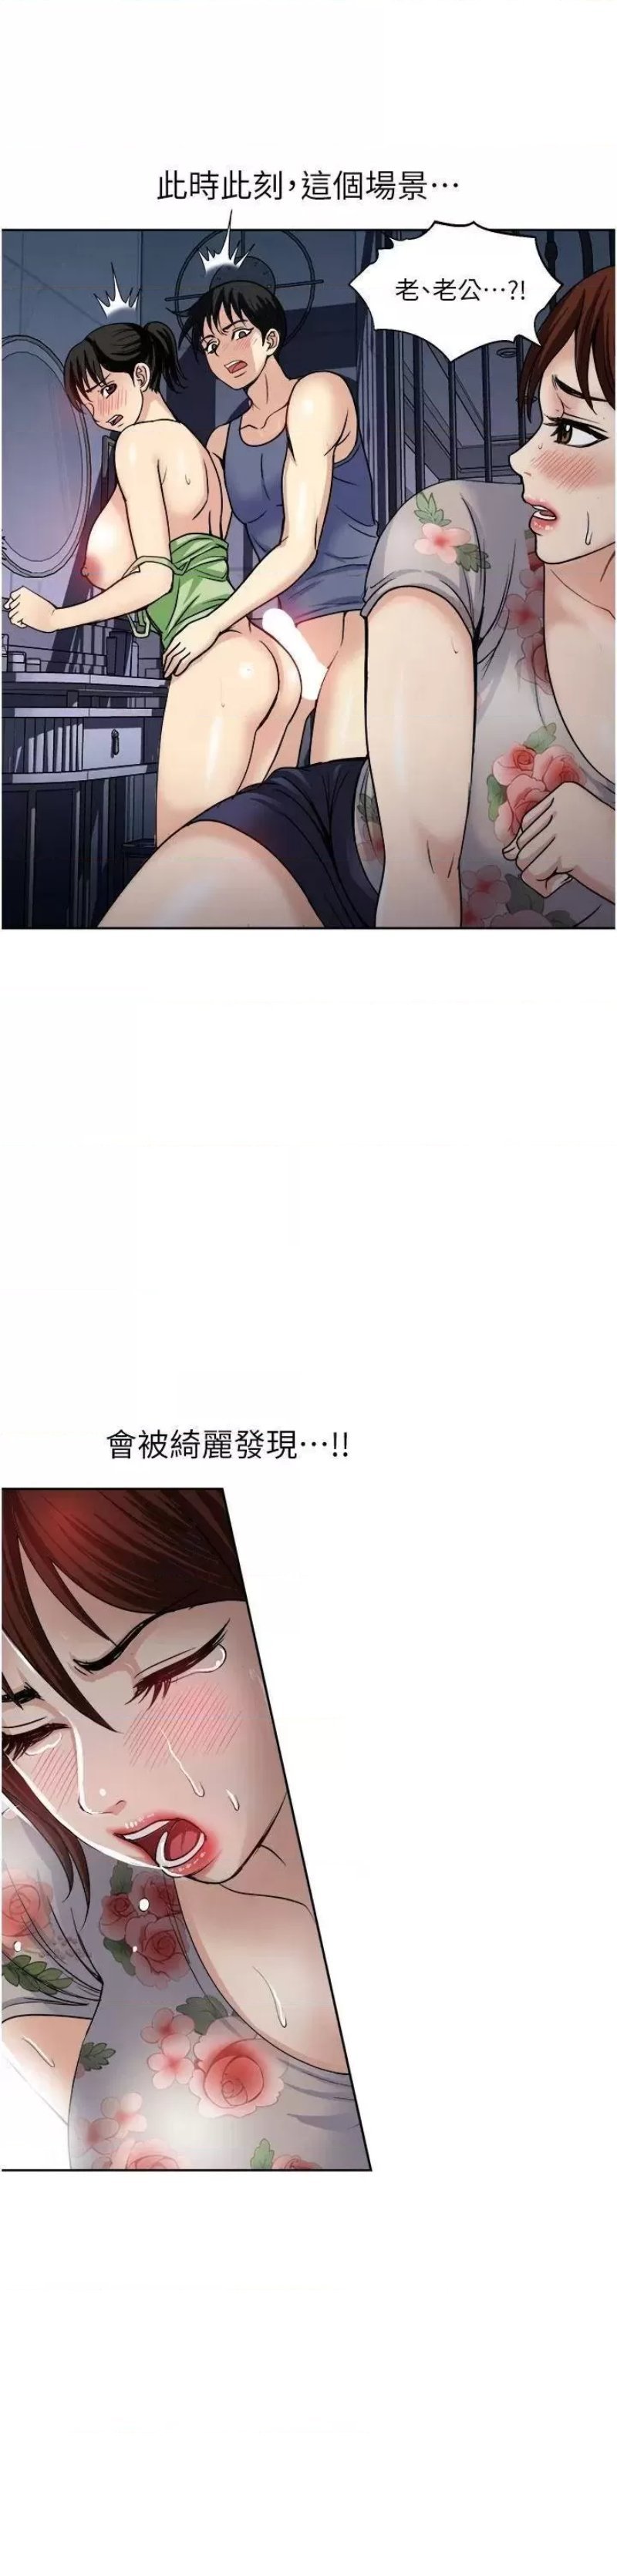 just-once-raw-chap-21-10